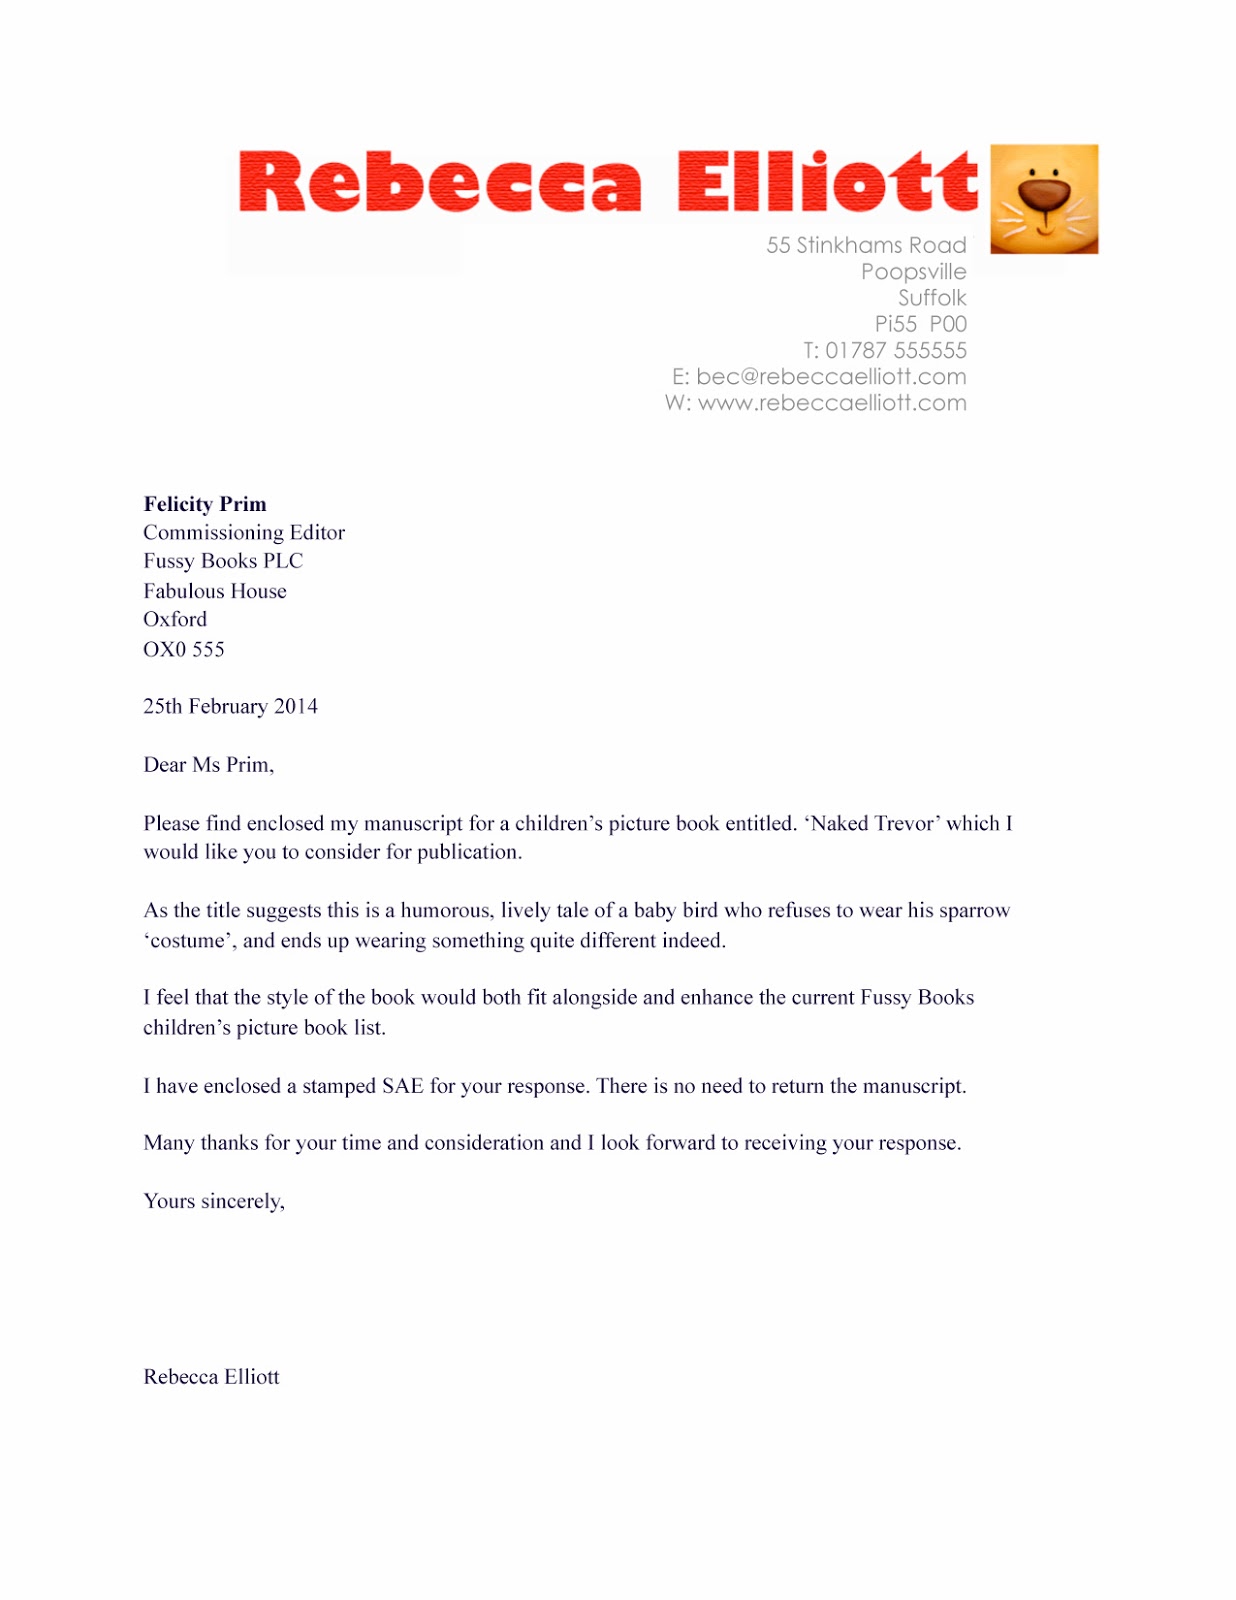 Proposal cover letter template free